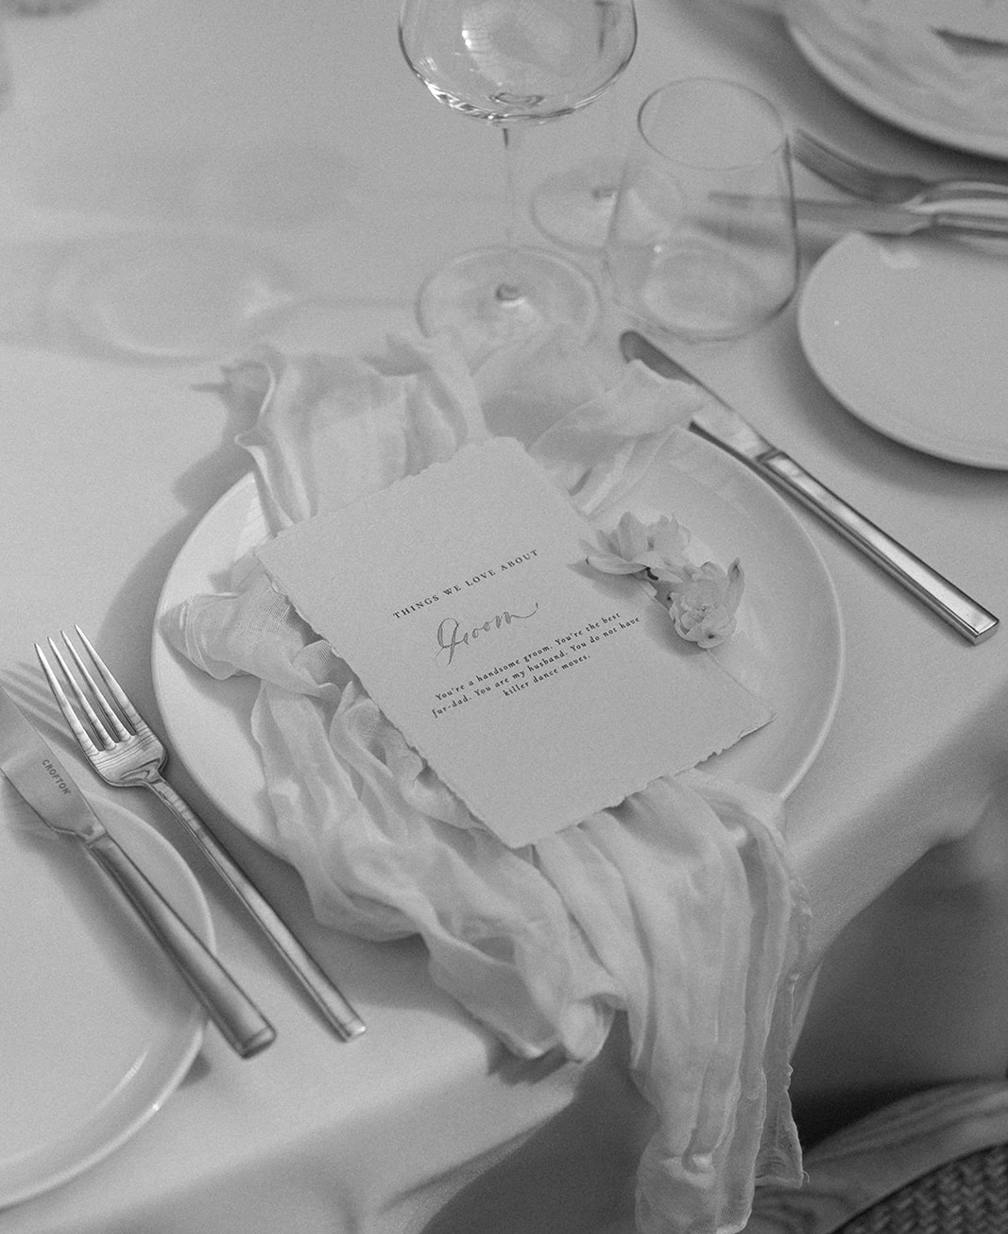 A black and white image of a table setting with a plate, a menu card, cutlery, glasses, and a decorative cloth. The plate holds a card that reads "Here's to love, honor," with elegant cursive handwriting. A flower-like decoration is placed beside the card.